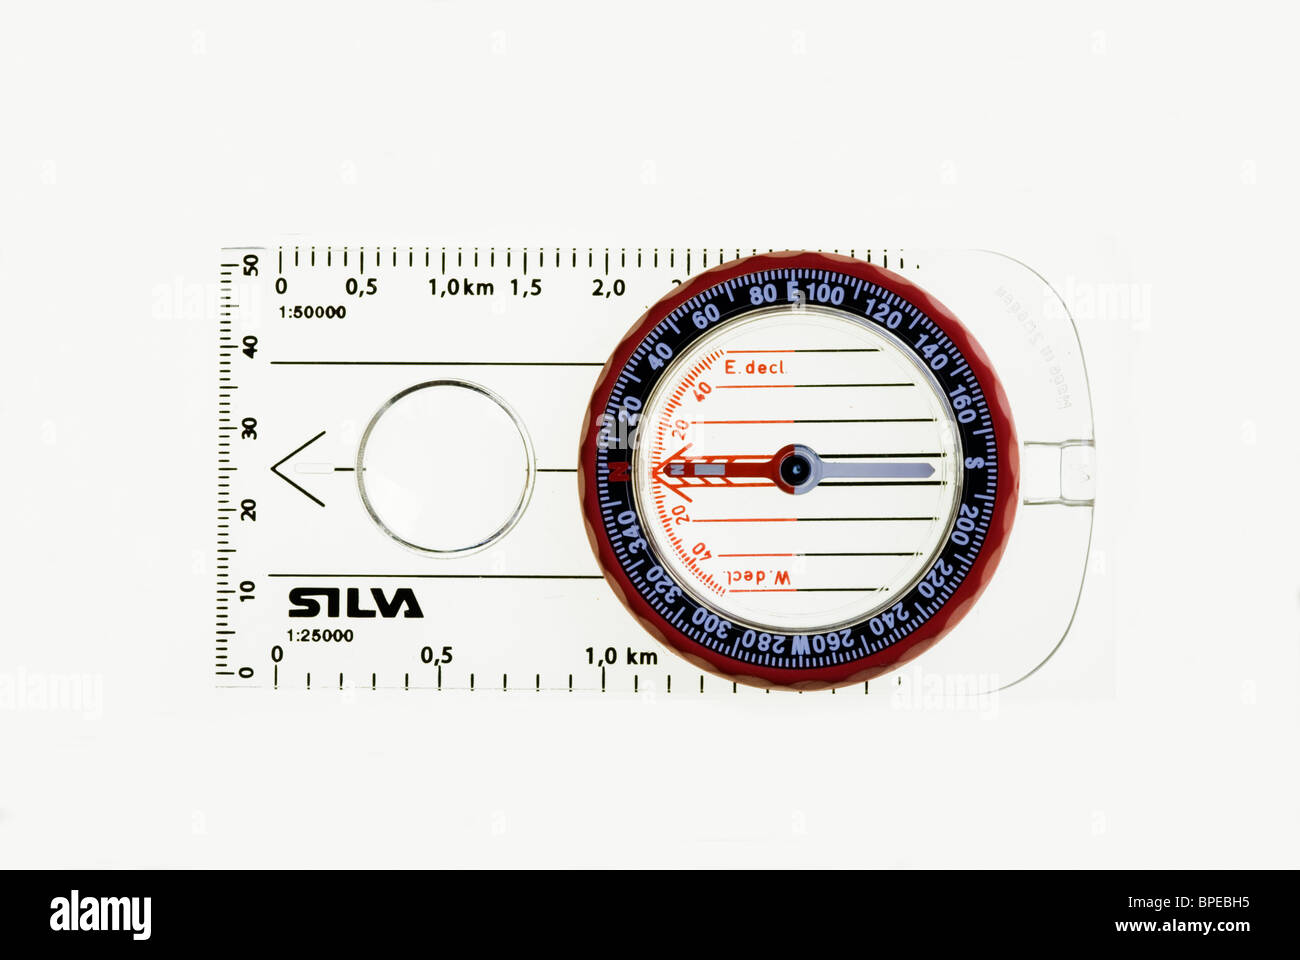 Magnetic compass Stock Photo